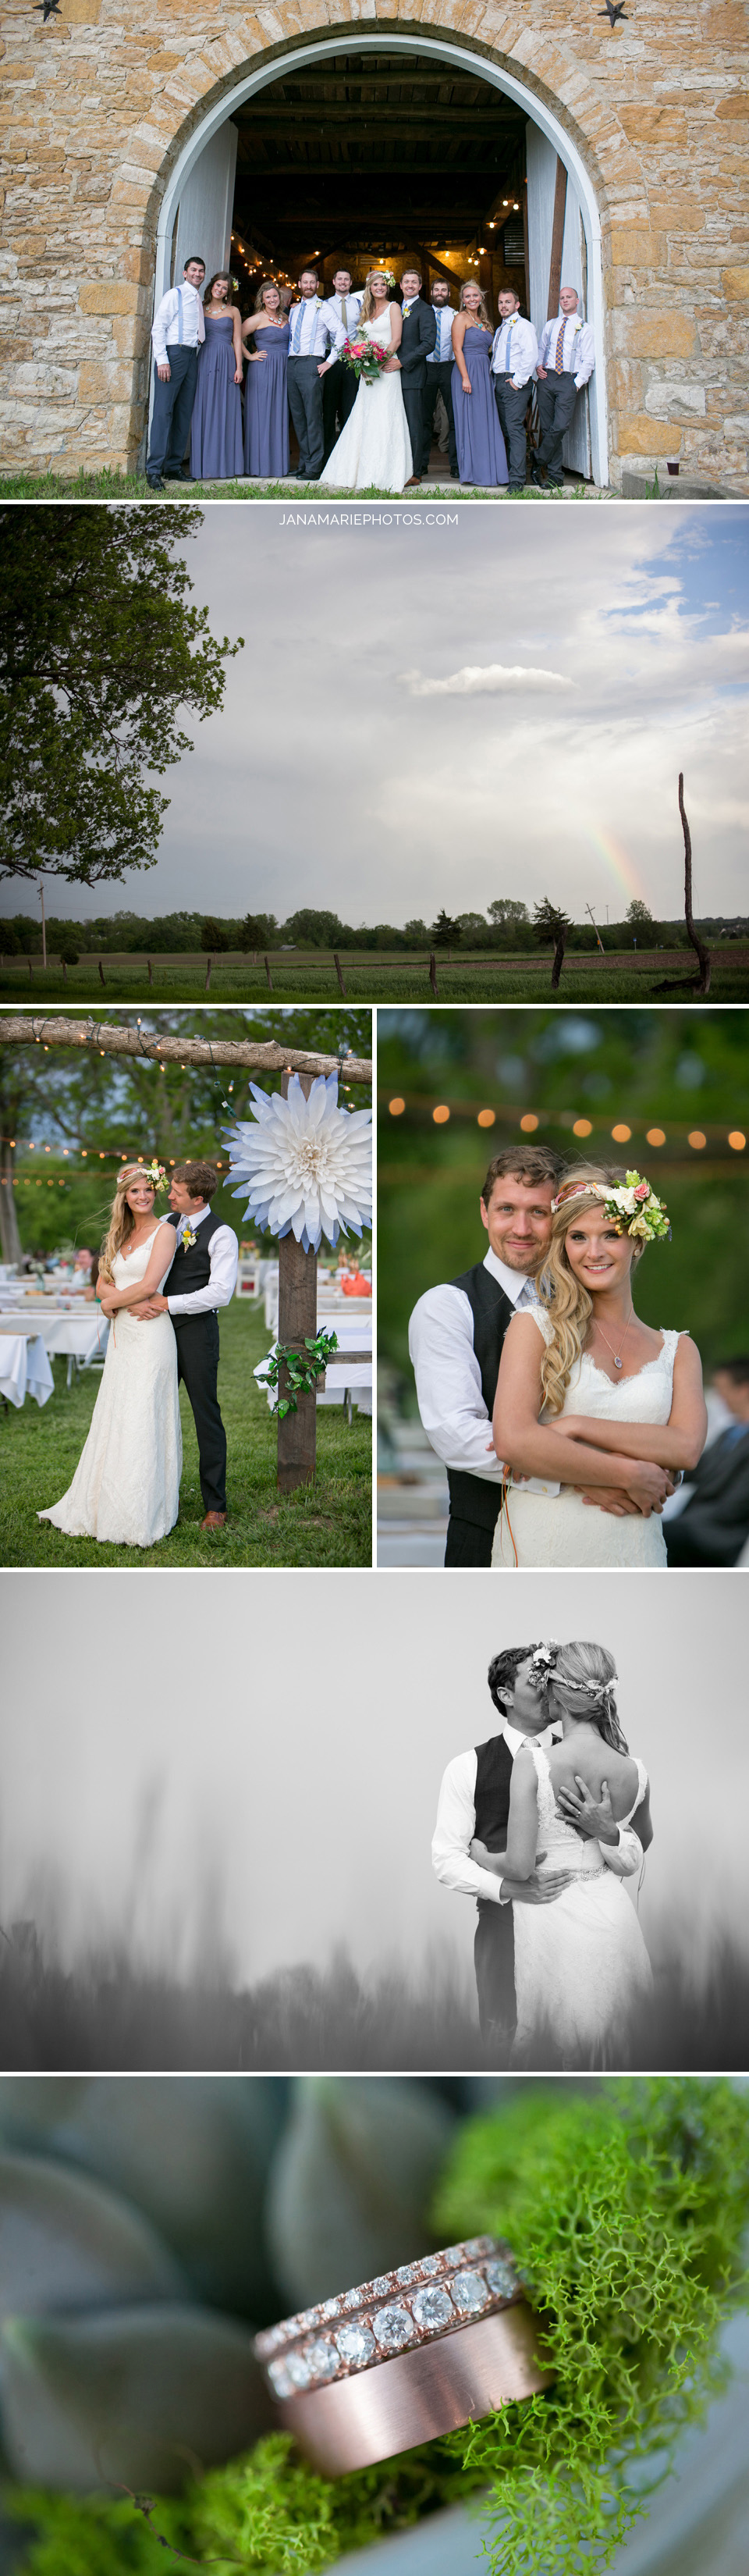 History Taylor Barn, Best Lawrence wedding photographer, KC weddings, Jana Marie Photography, Eclectic details, outdoor ceremony, Spring, Anthropology flowers, DIY decor, Red door wedding event planning